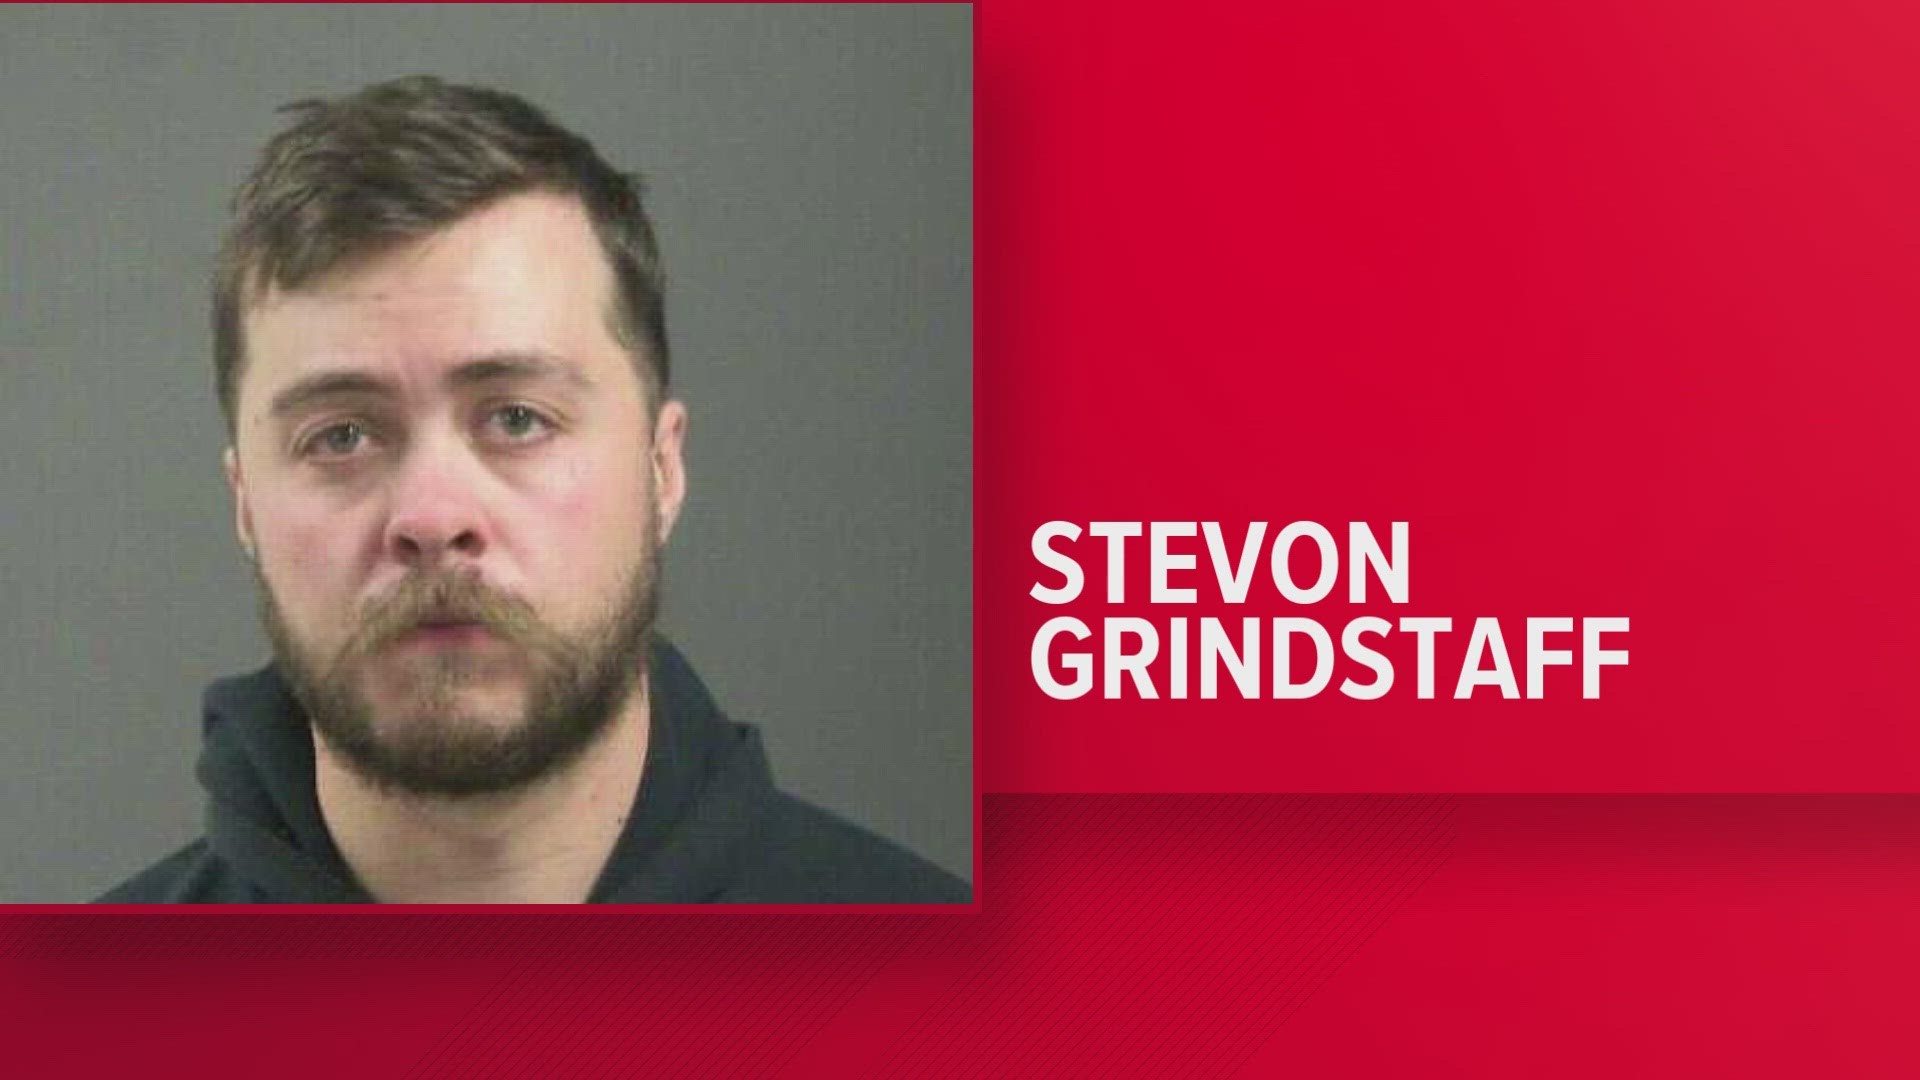 Stevon Grindstaff was arrested, booked, and charged with murder.